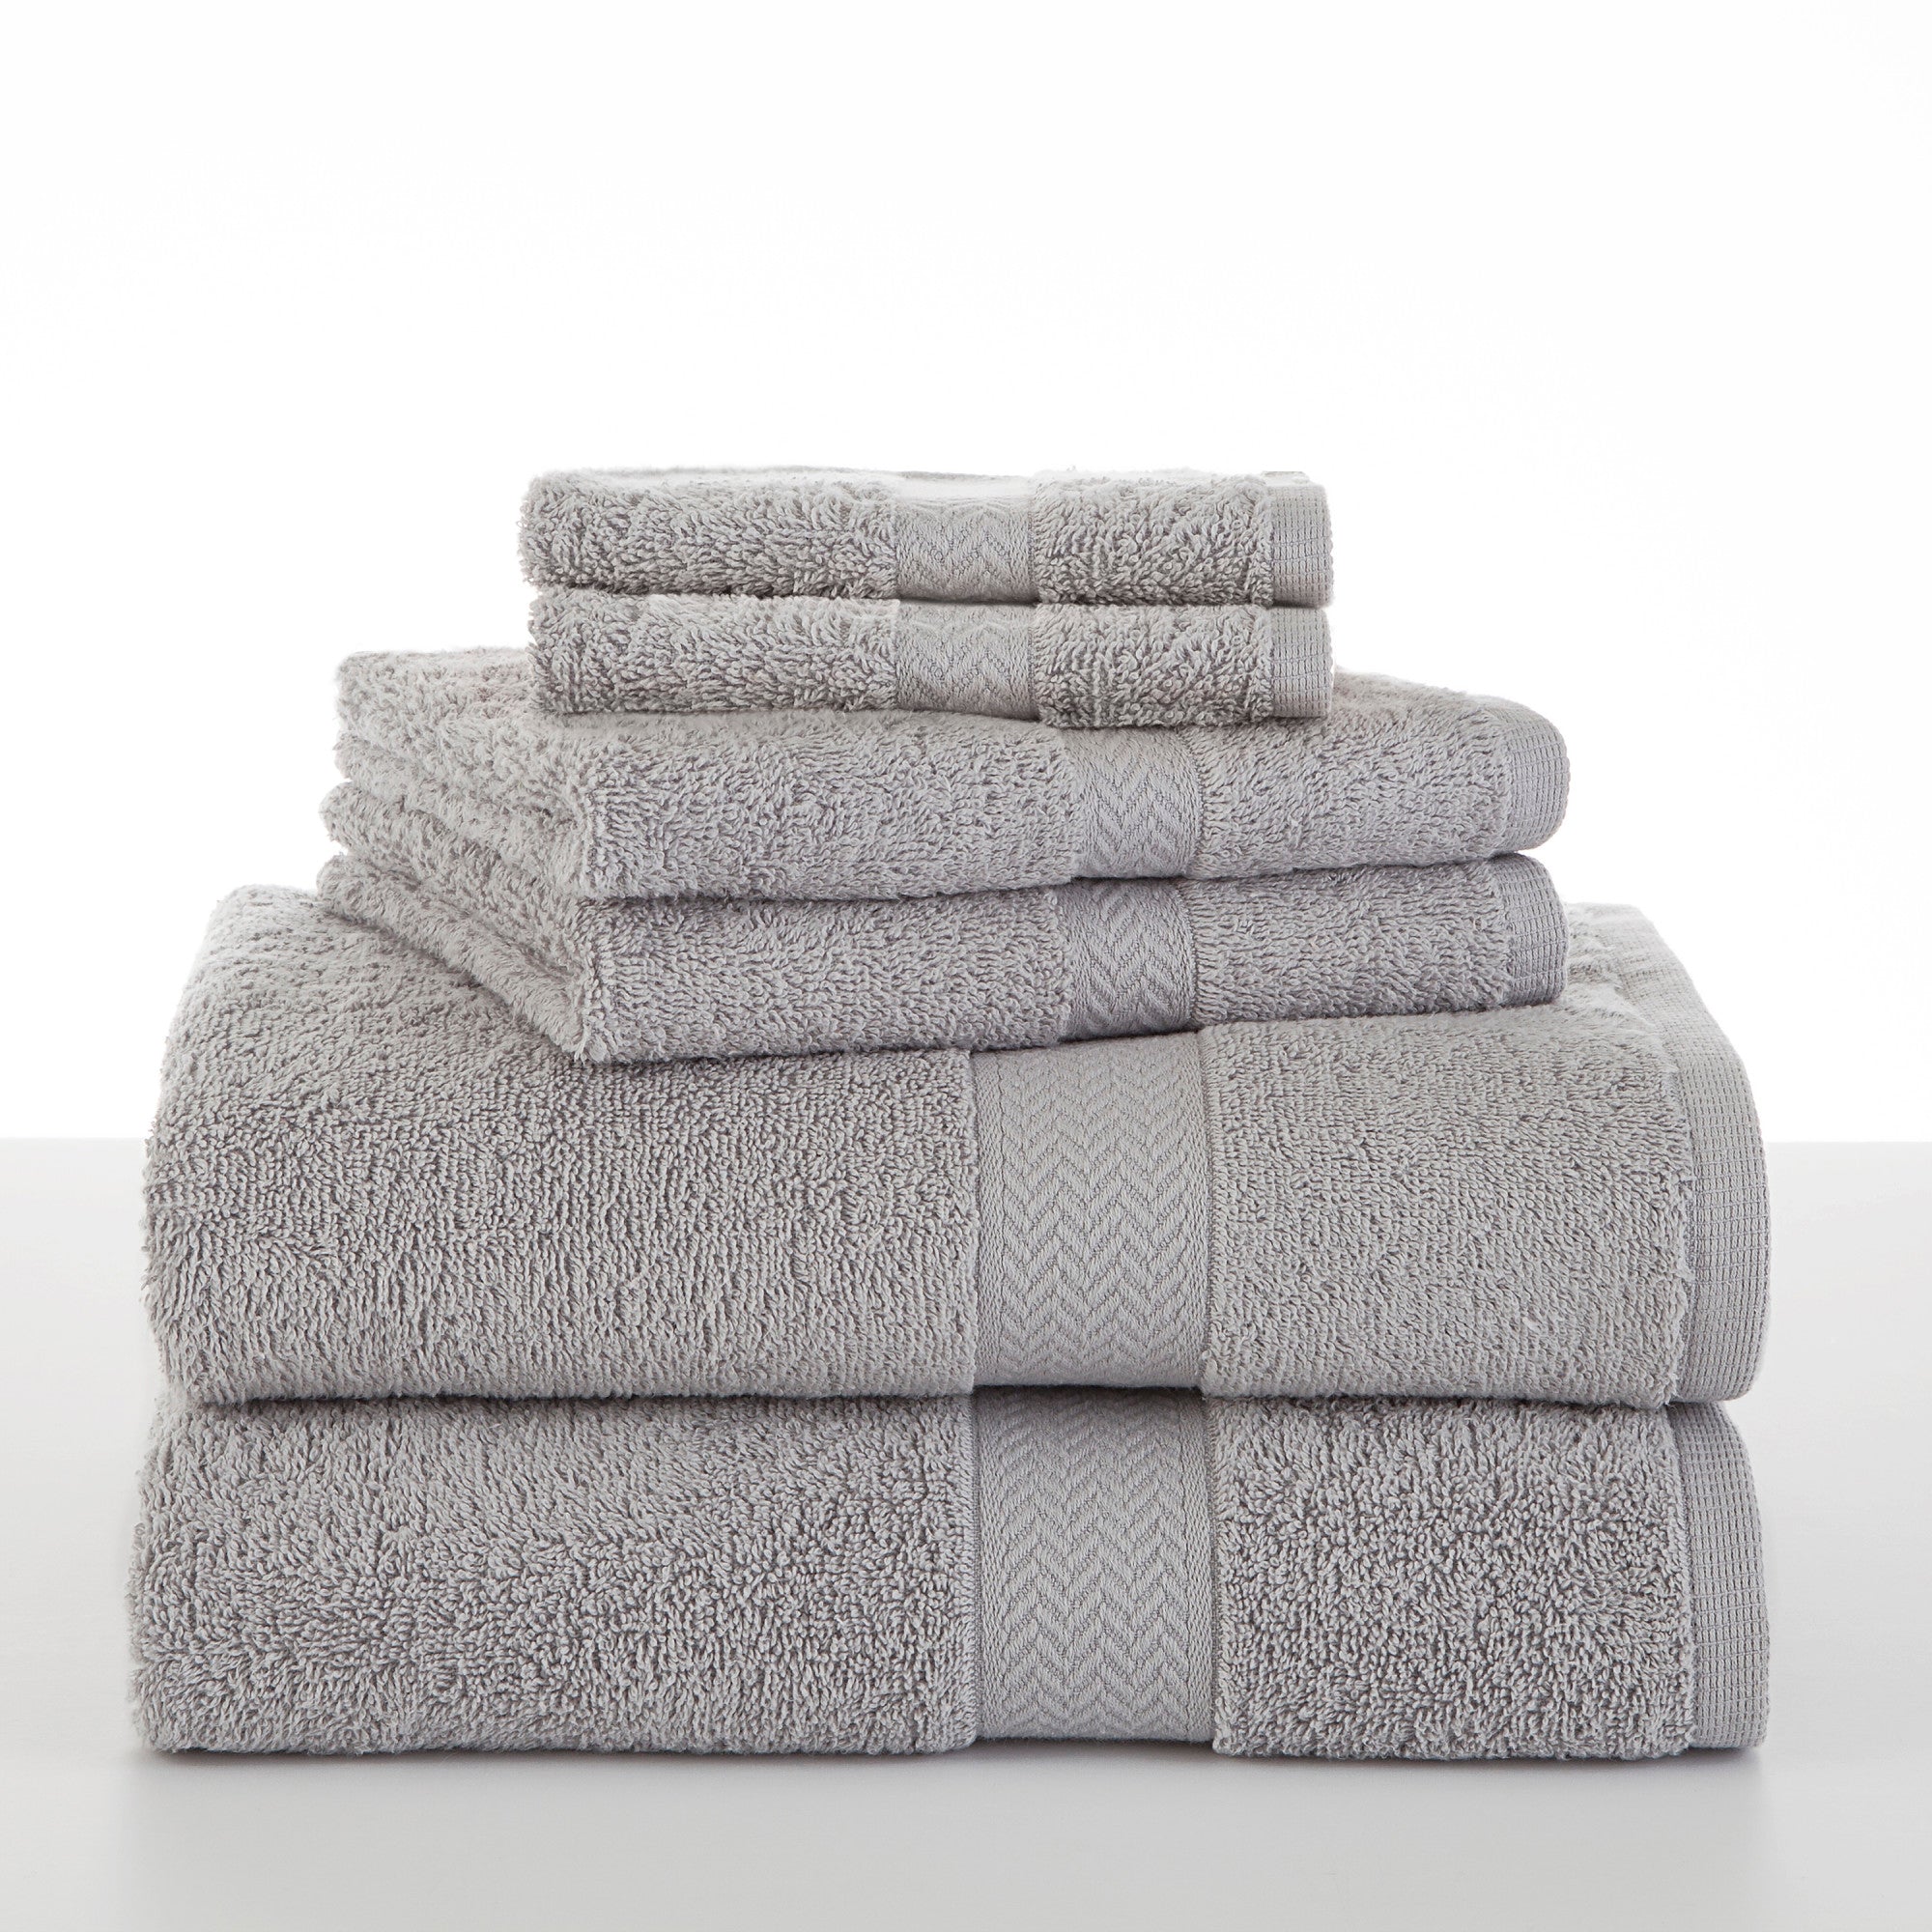 Martex 6-piece Luxury Towel Set, 2 Bath Towels 2 Hand Towels 2 Washcloths -  600 Gsm 100% Ring Spun Cotton Highly Absorbent Soft Towels For Bathroom -  Ideal For Everyday Use, Hotel & Spa - (Blue) 